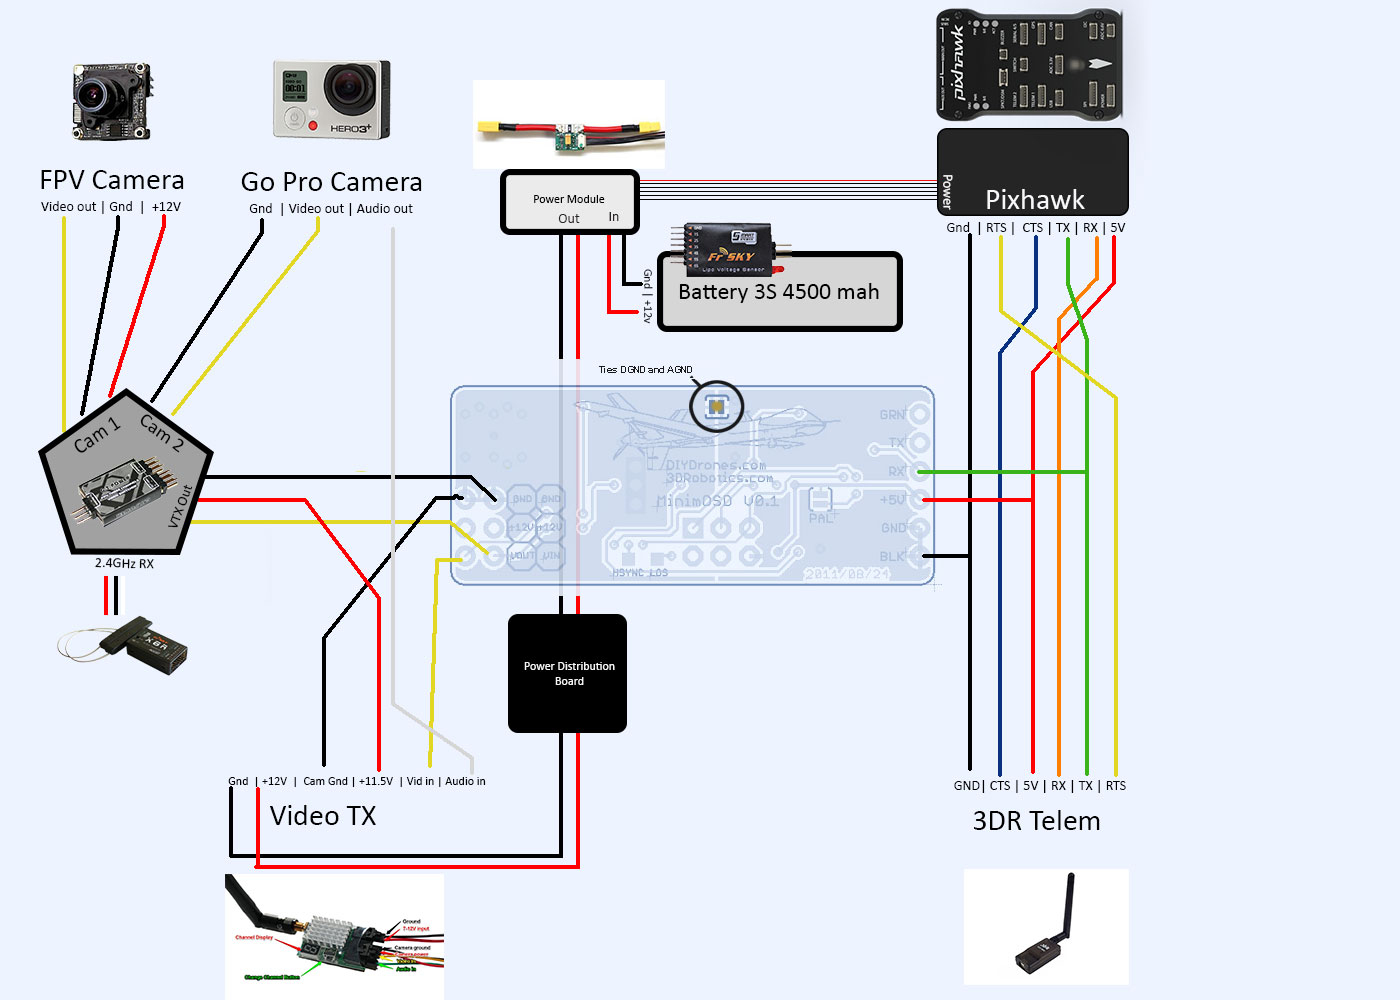 Wiring An Fpv Camera With A 3 Way Video Switch, Minimosd, A Gopro - Pixhawk Wiring Diagram